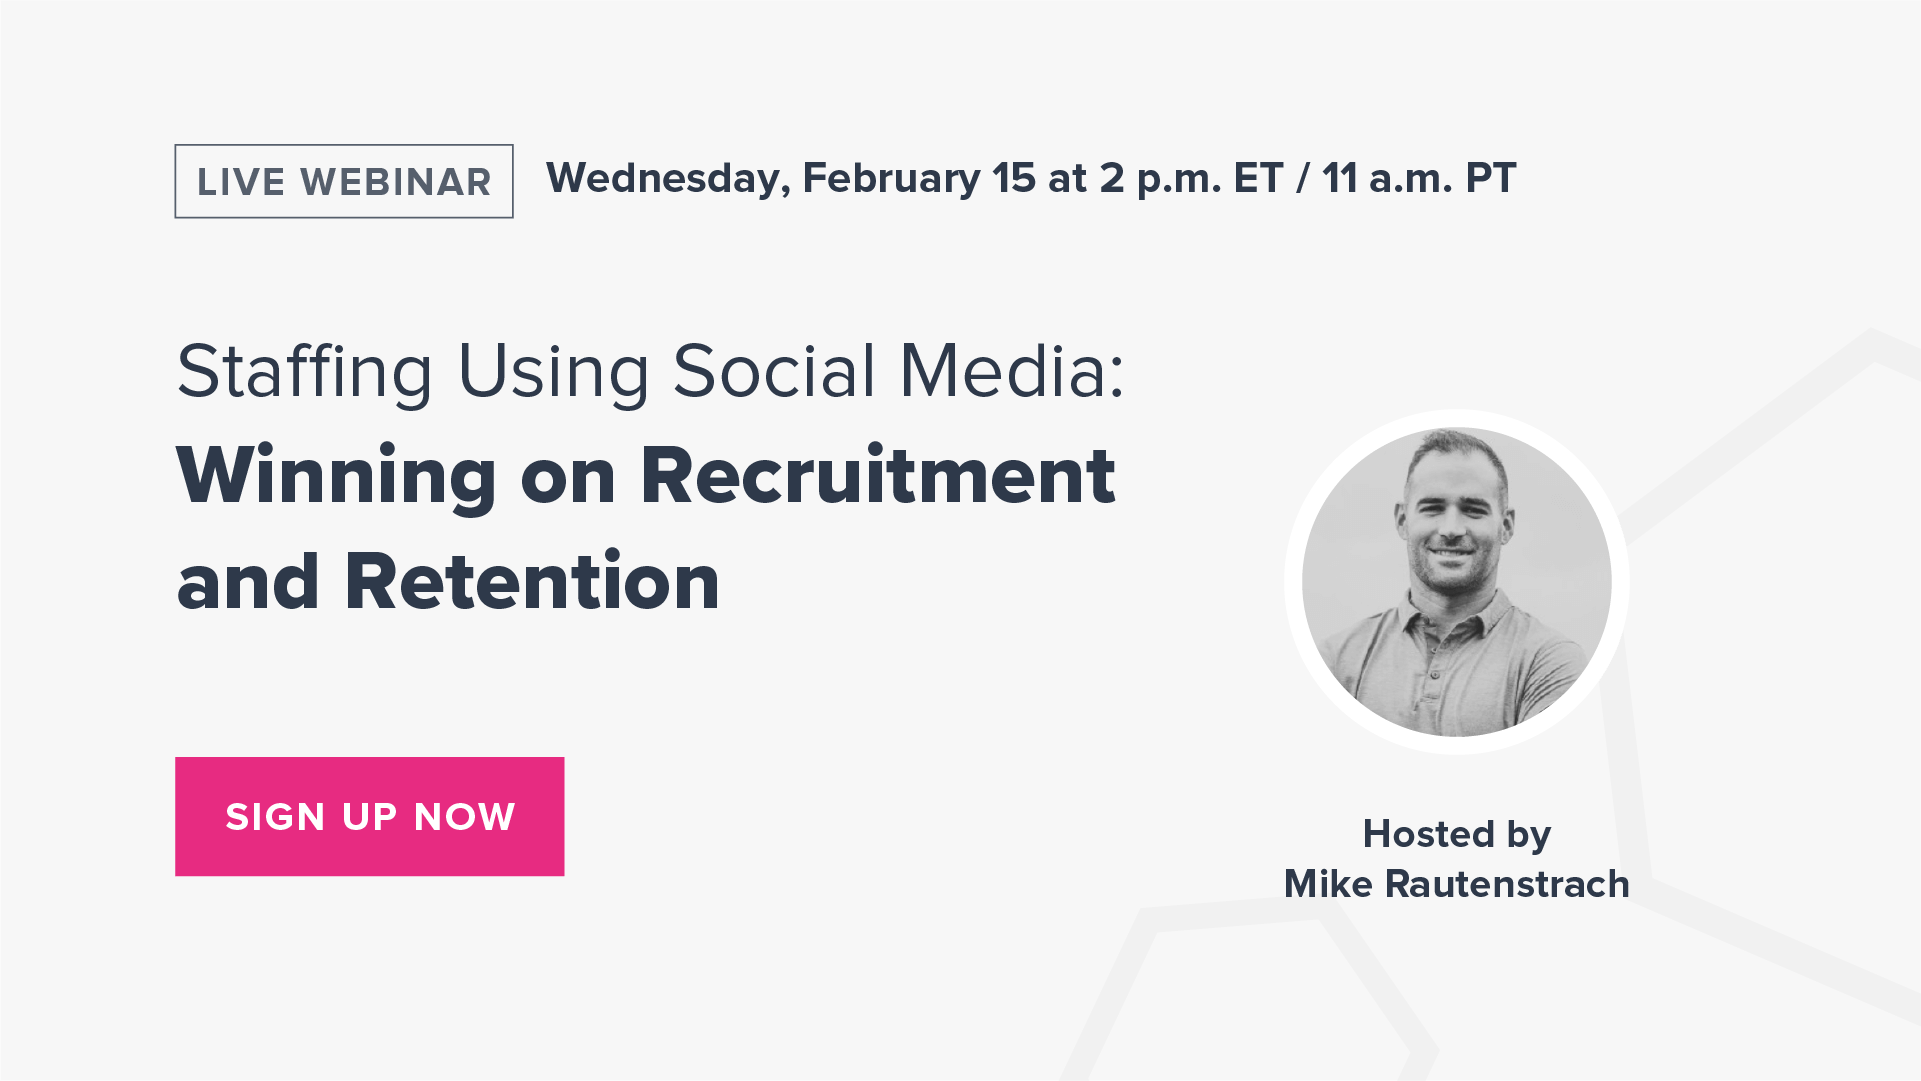 Staffing Using Social Media: Winning on Recruitment and Retention